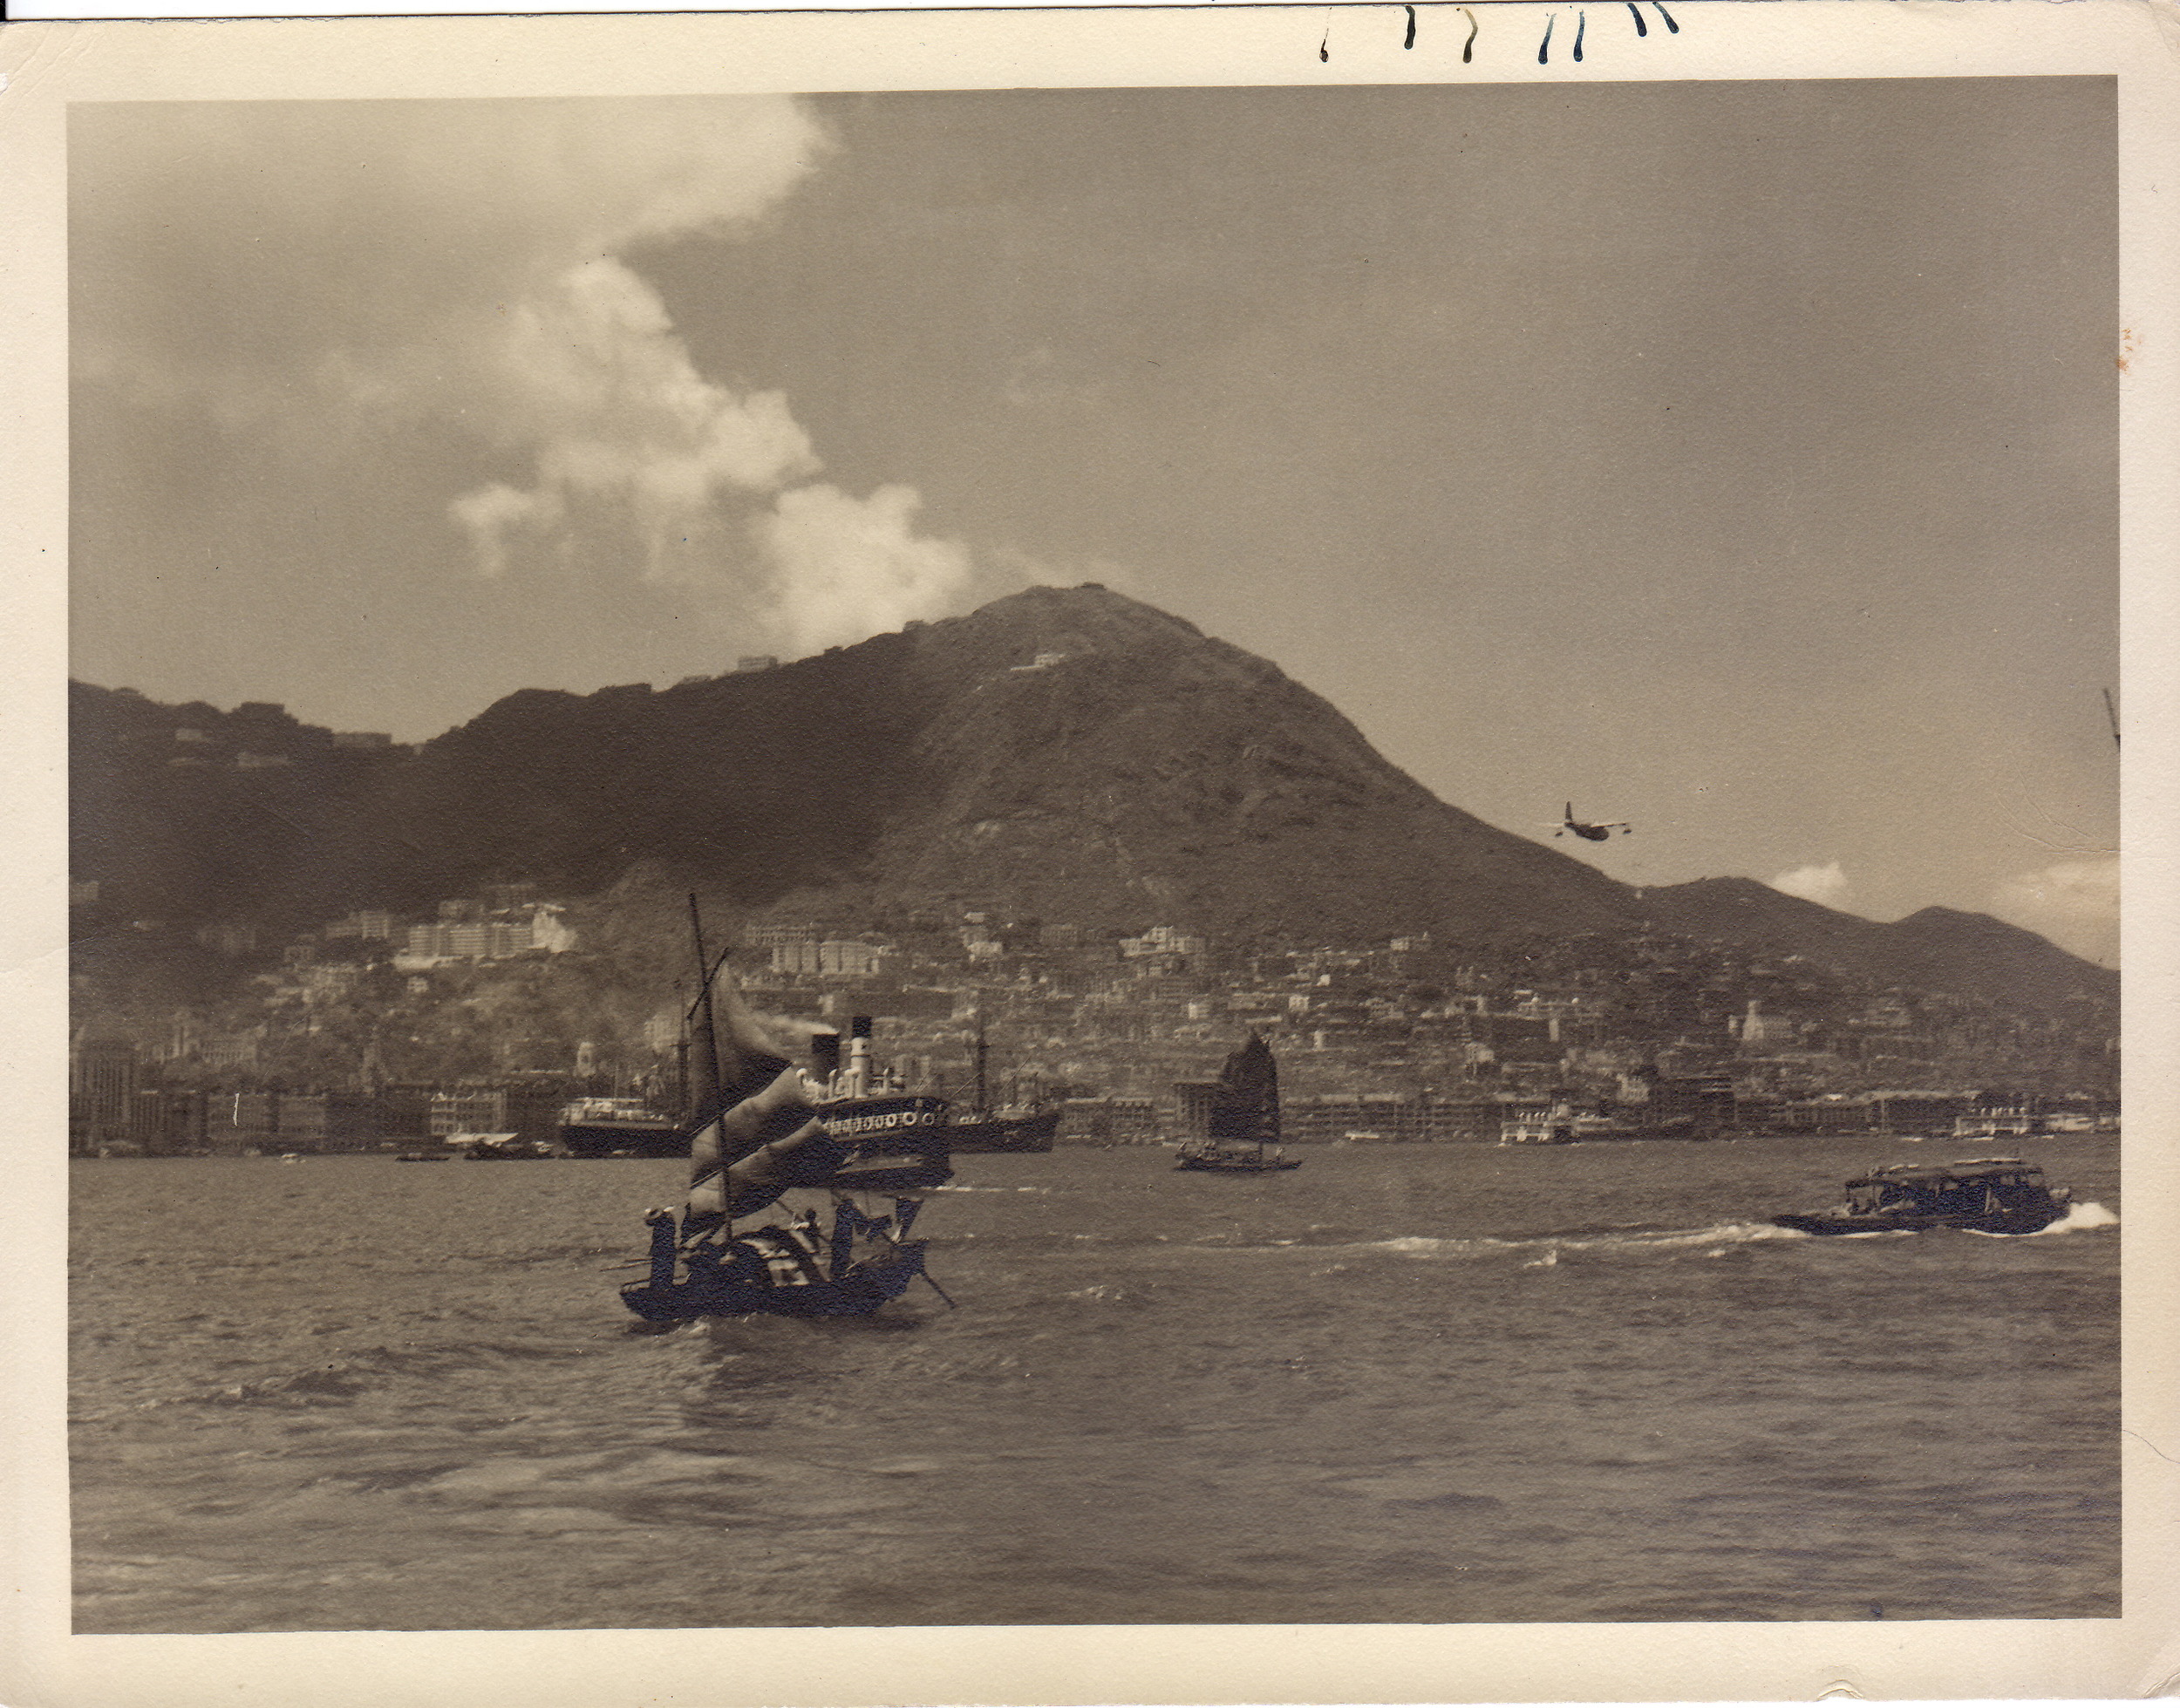 Planes, junks and ferries traffic Hong Kong harbour, 1950